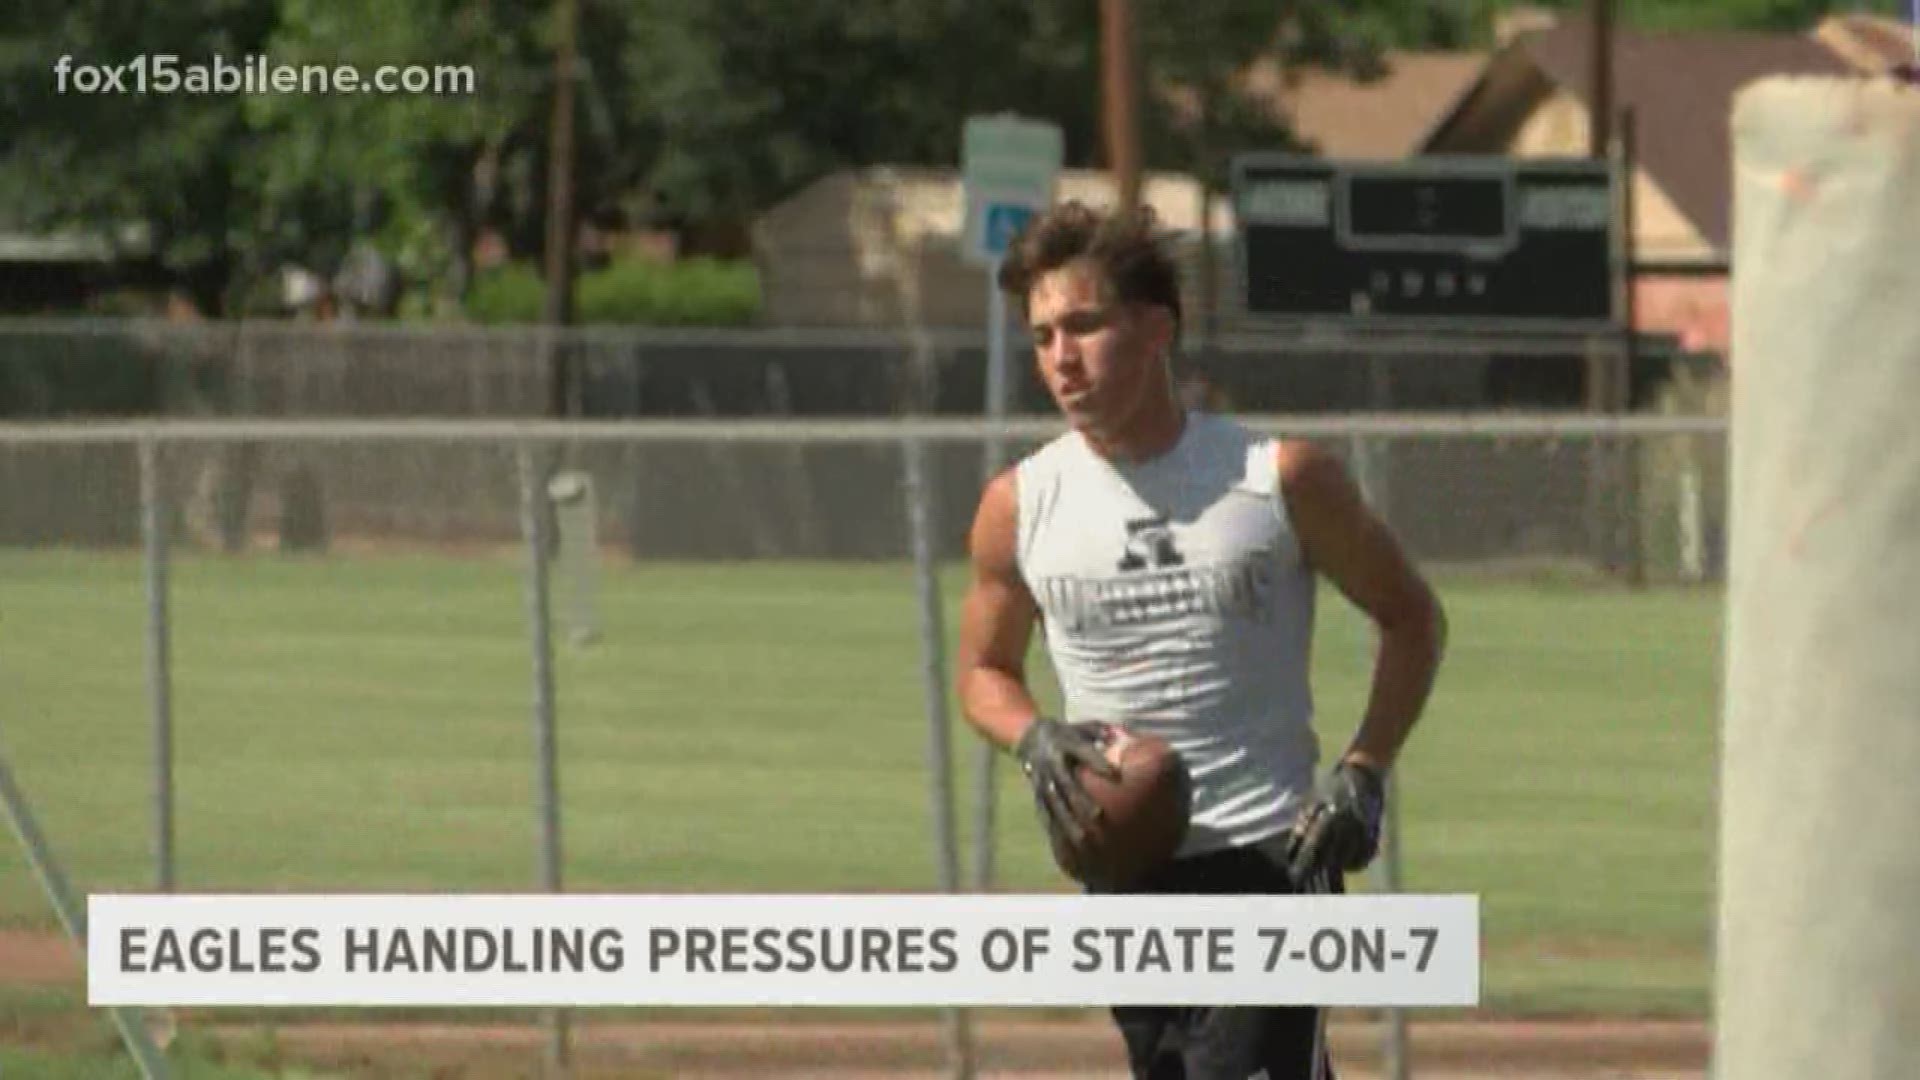 While it doesn't exactly compare to Friday nights during the regular season, State 7-on-7 football still comes with added pressure. Abilene High is hoping to adopt the correct mindset heading to College Station.